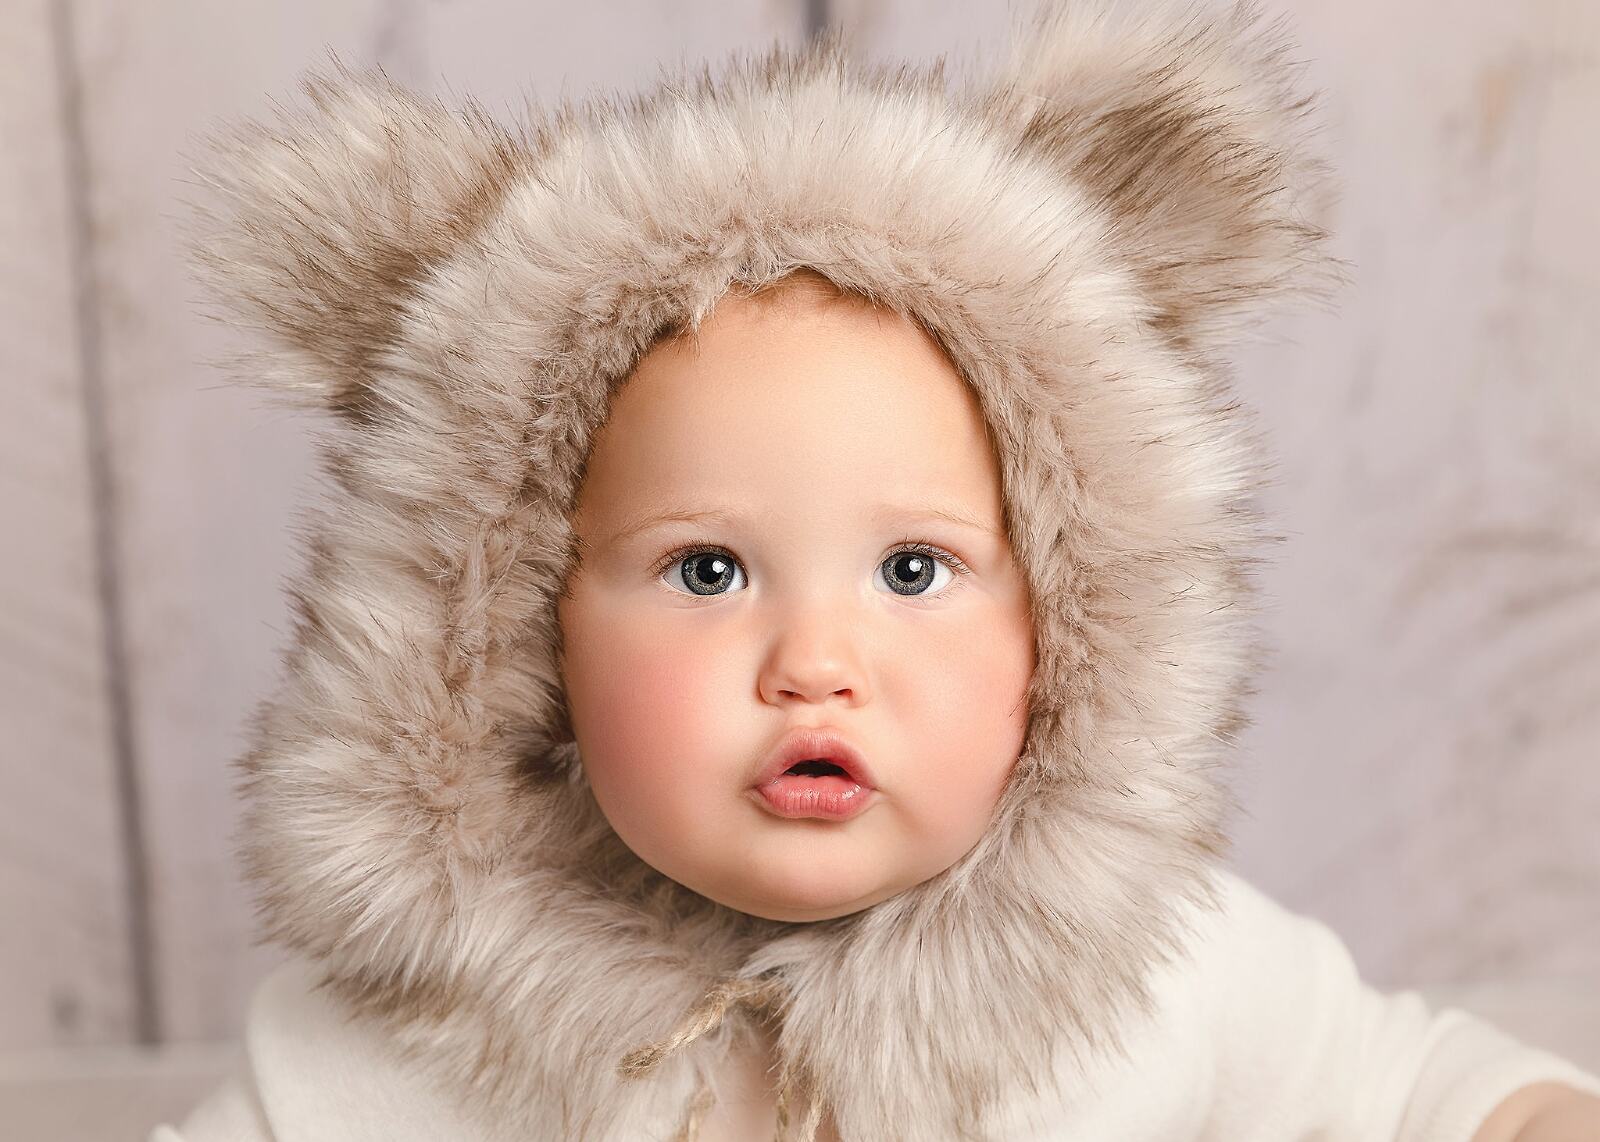 Baby boy sitter bear outfit photo shoot in studio Hereford, Herefordshire